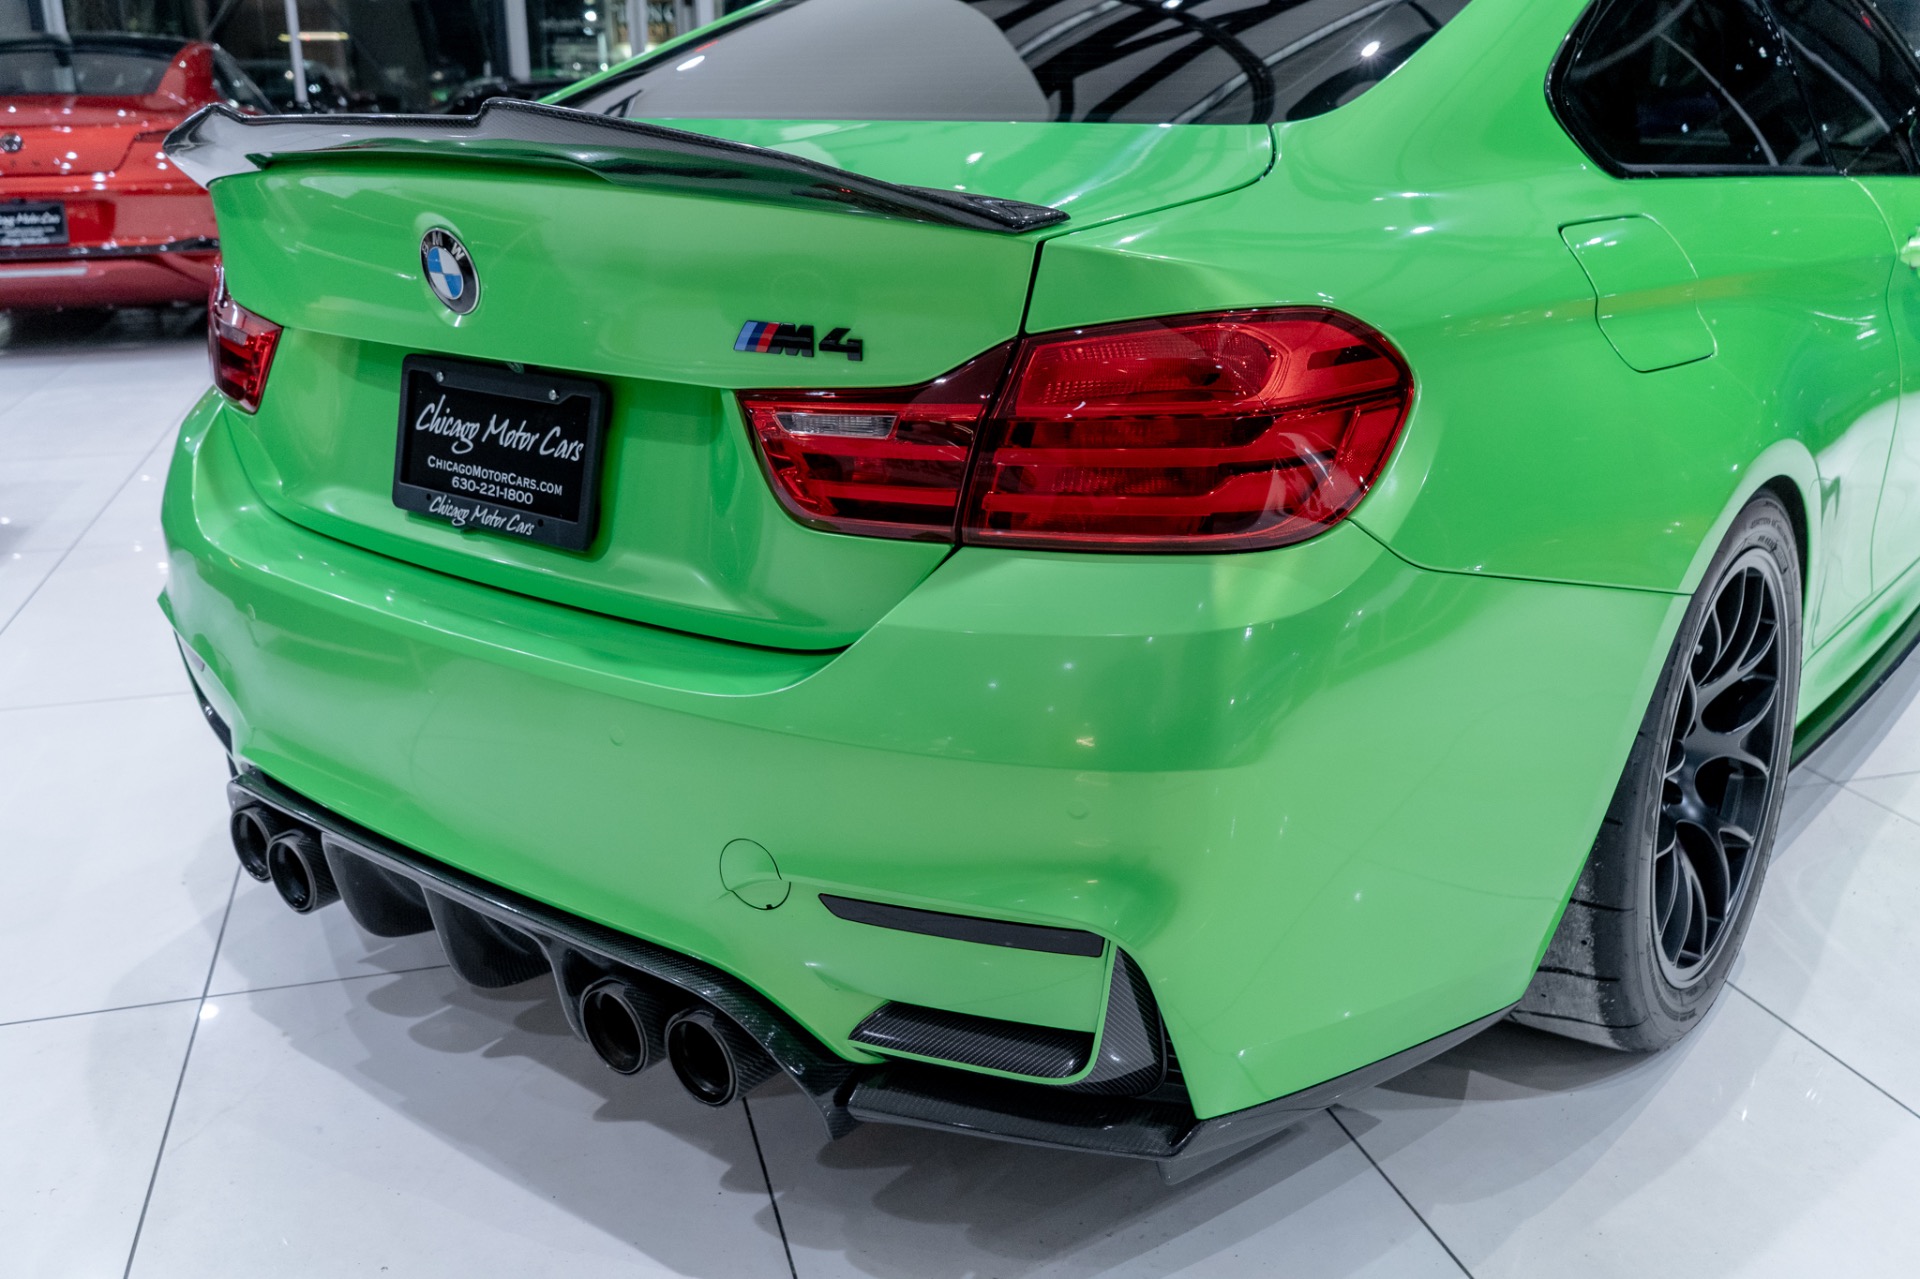 Used-2016-BMW-M4-Coupe-Exec-Pkg-Carbon-Roof-MHD-Stage-2-Tune-Full-Exhaust-Carbon-Aero